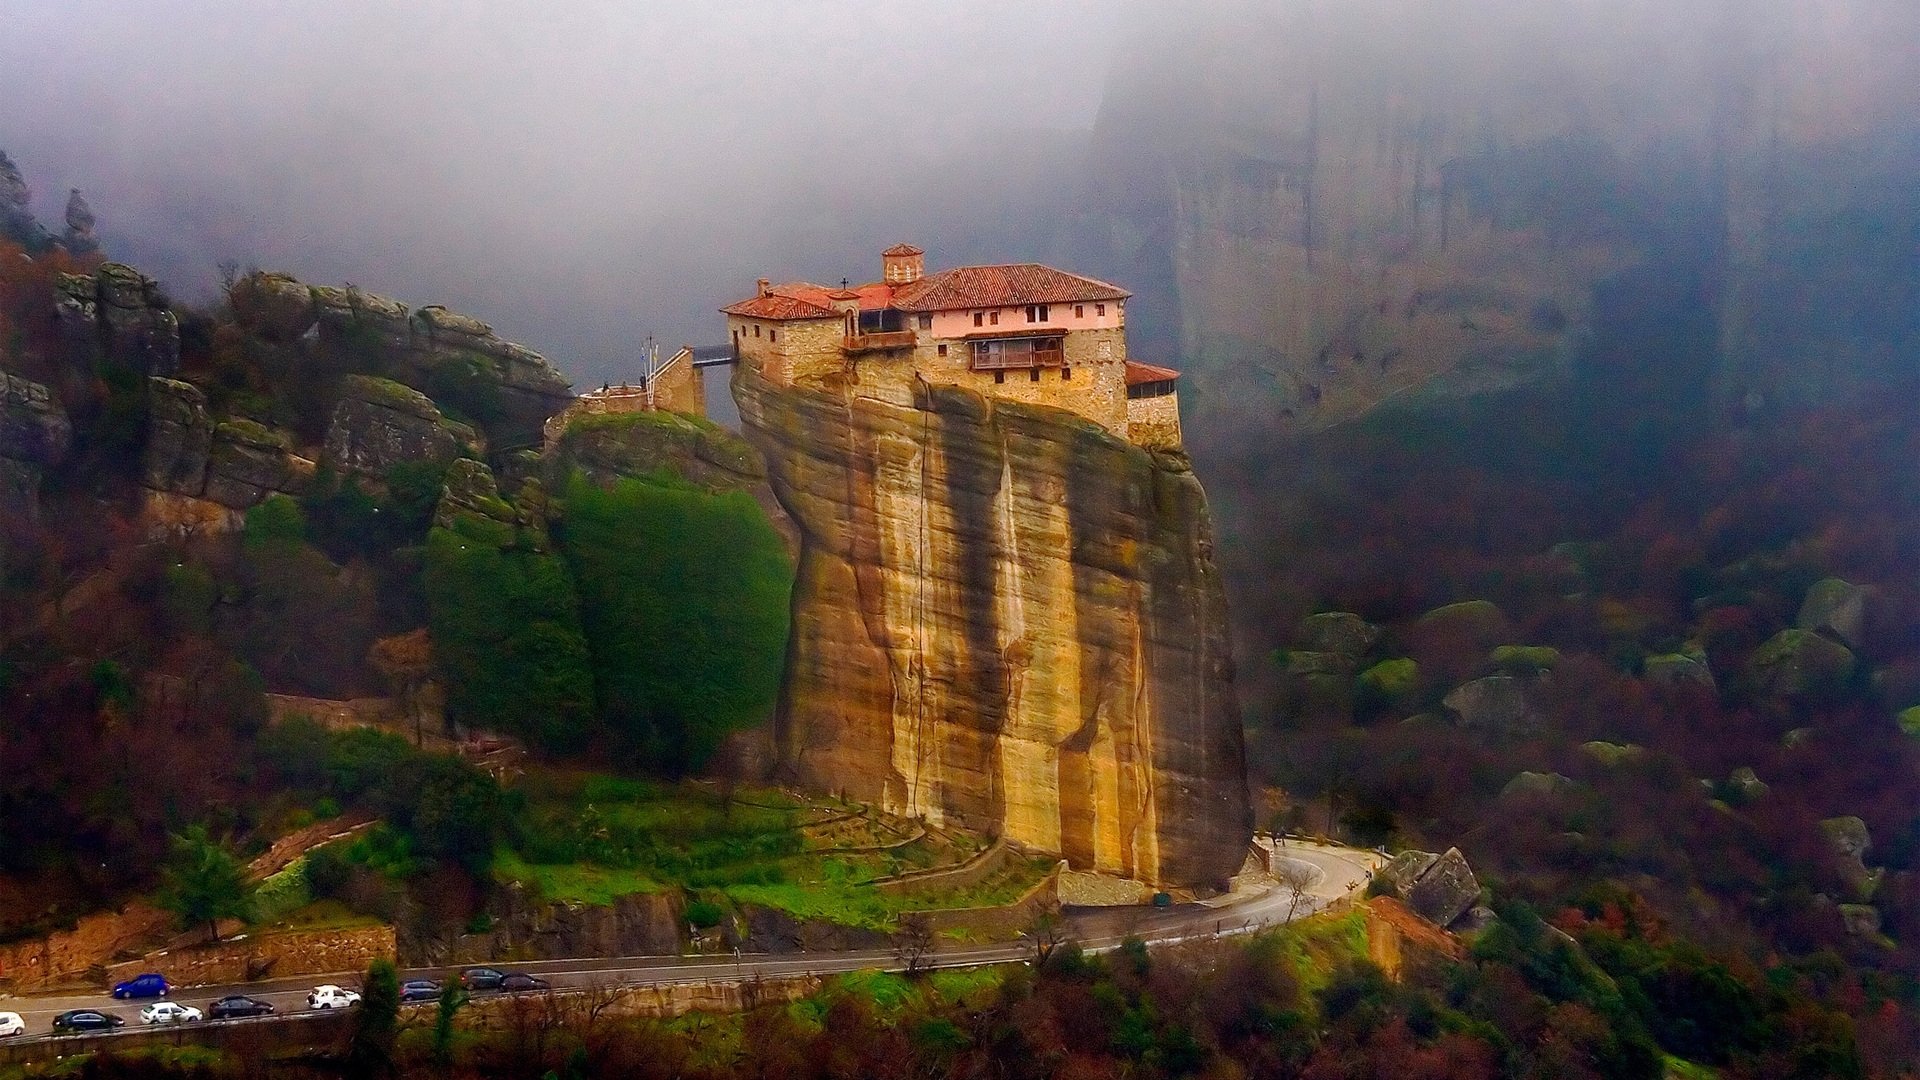 50 Meteora Hd Wallpapers Background Images Wallpaper Abyss Images, Photos, Reviews